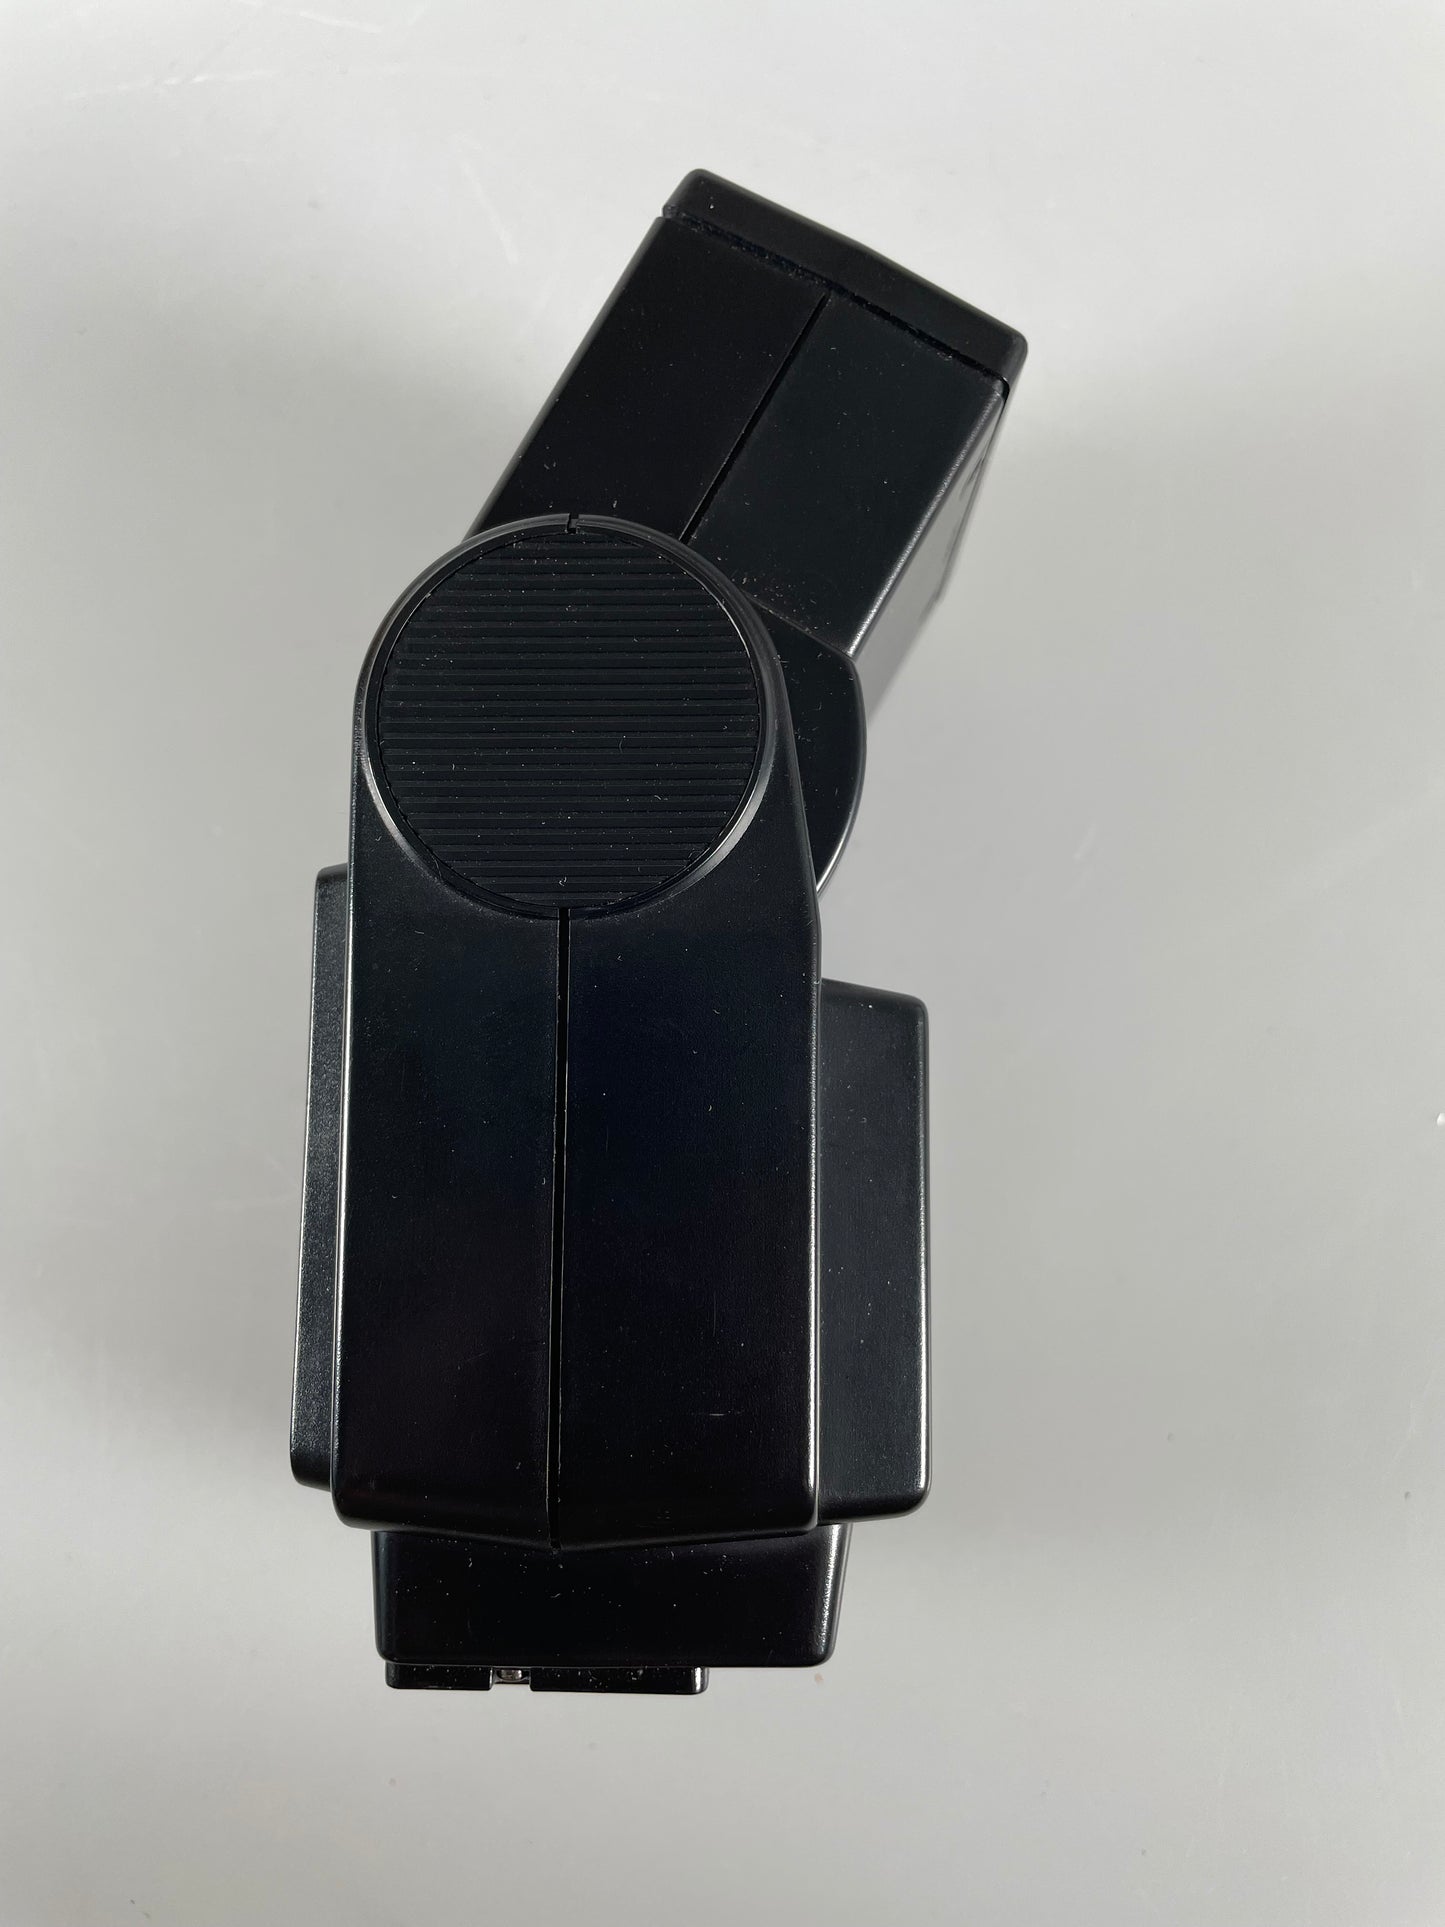 Canon Speed Light Flash 199A Shoe Mount for Canon A1 Ae1 AV1